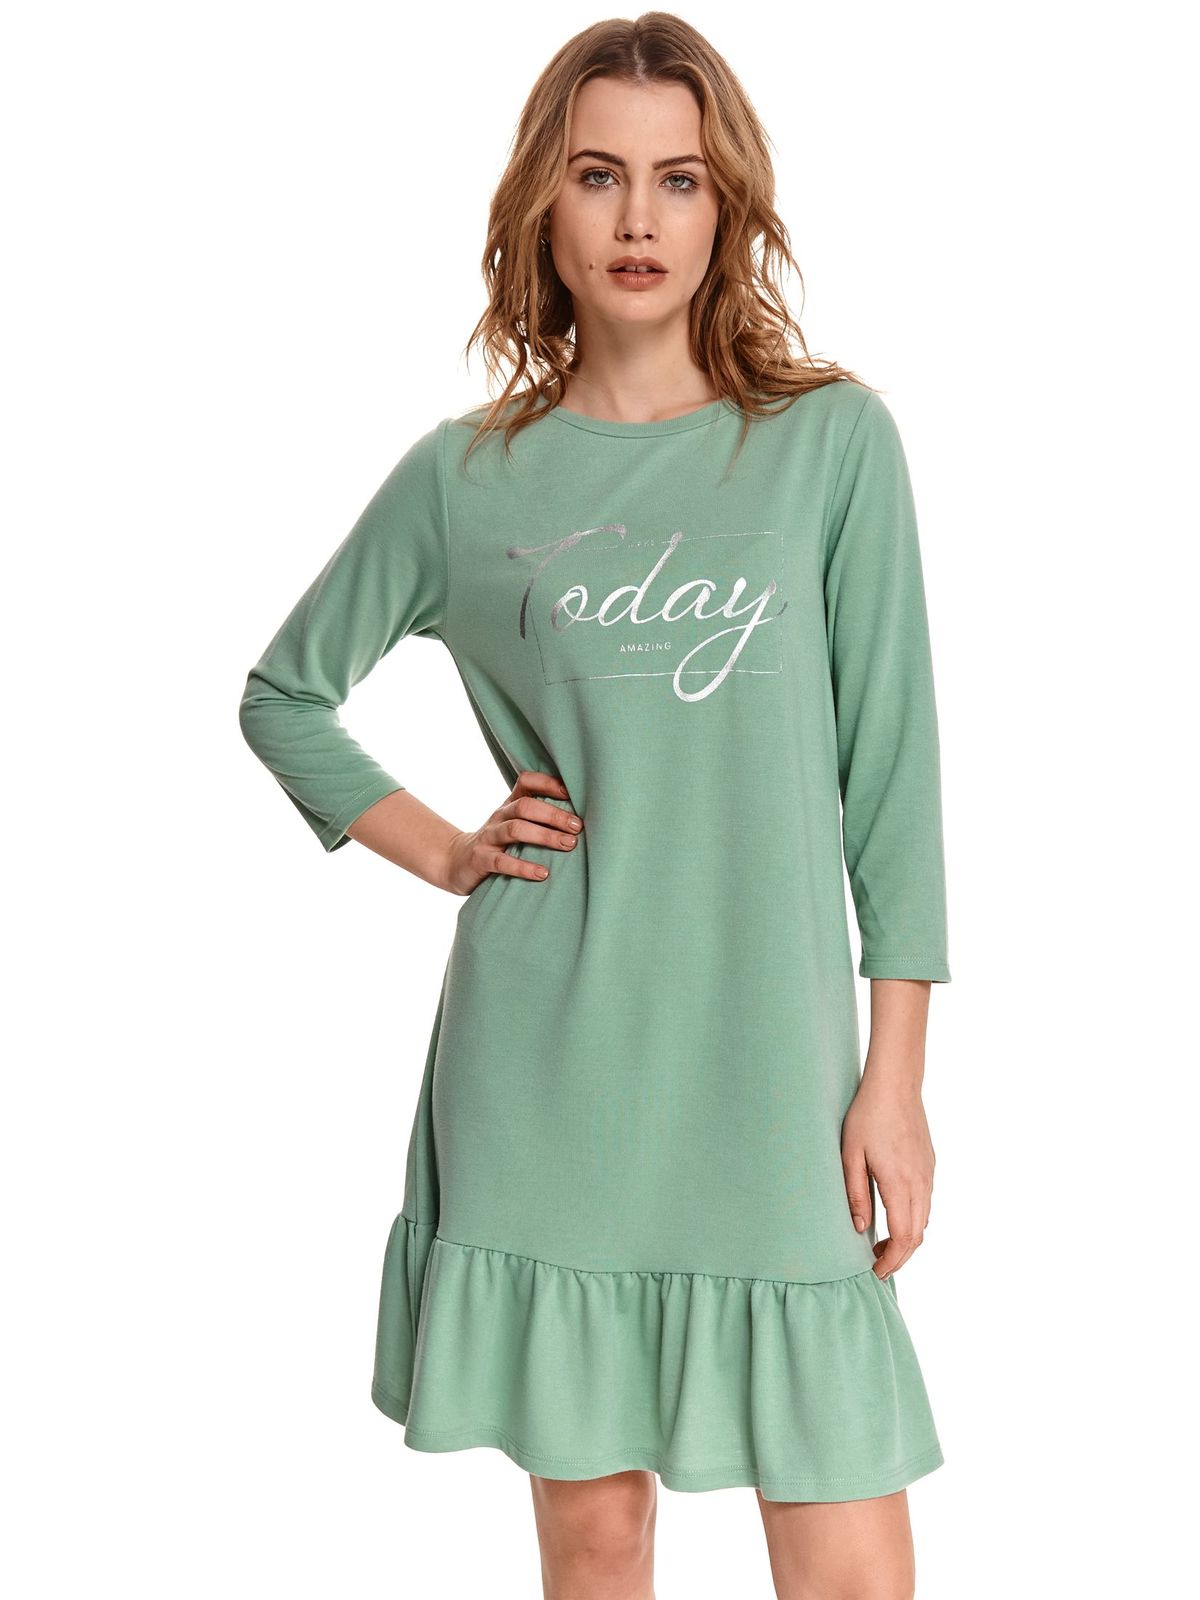 Mint dress loose fit with ruffle details